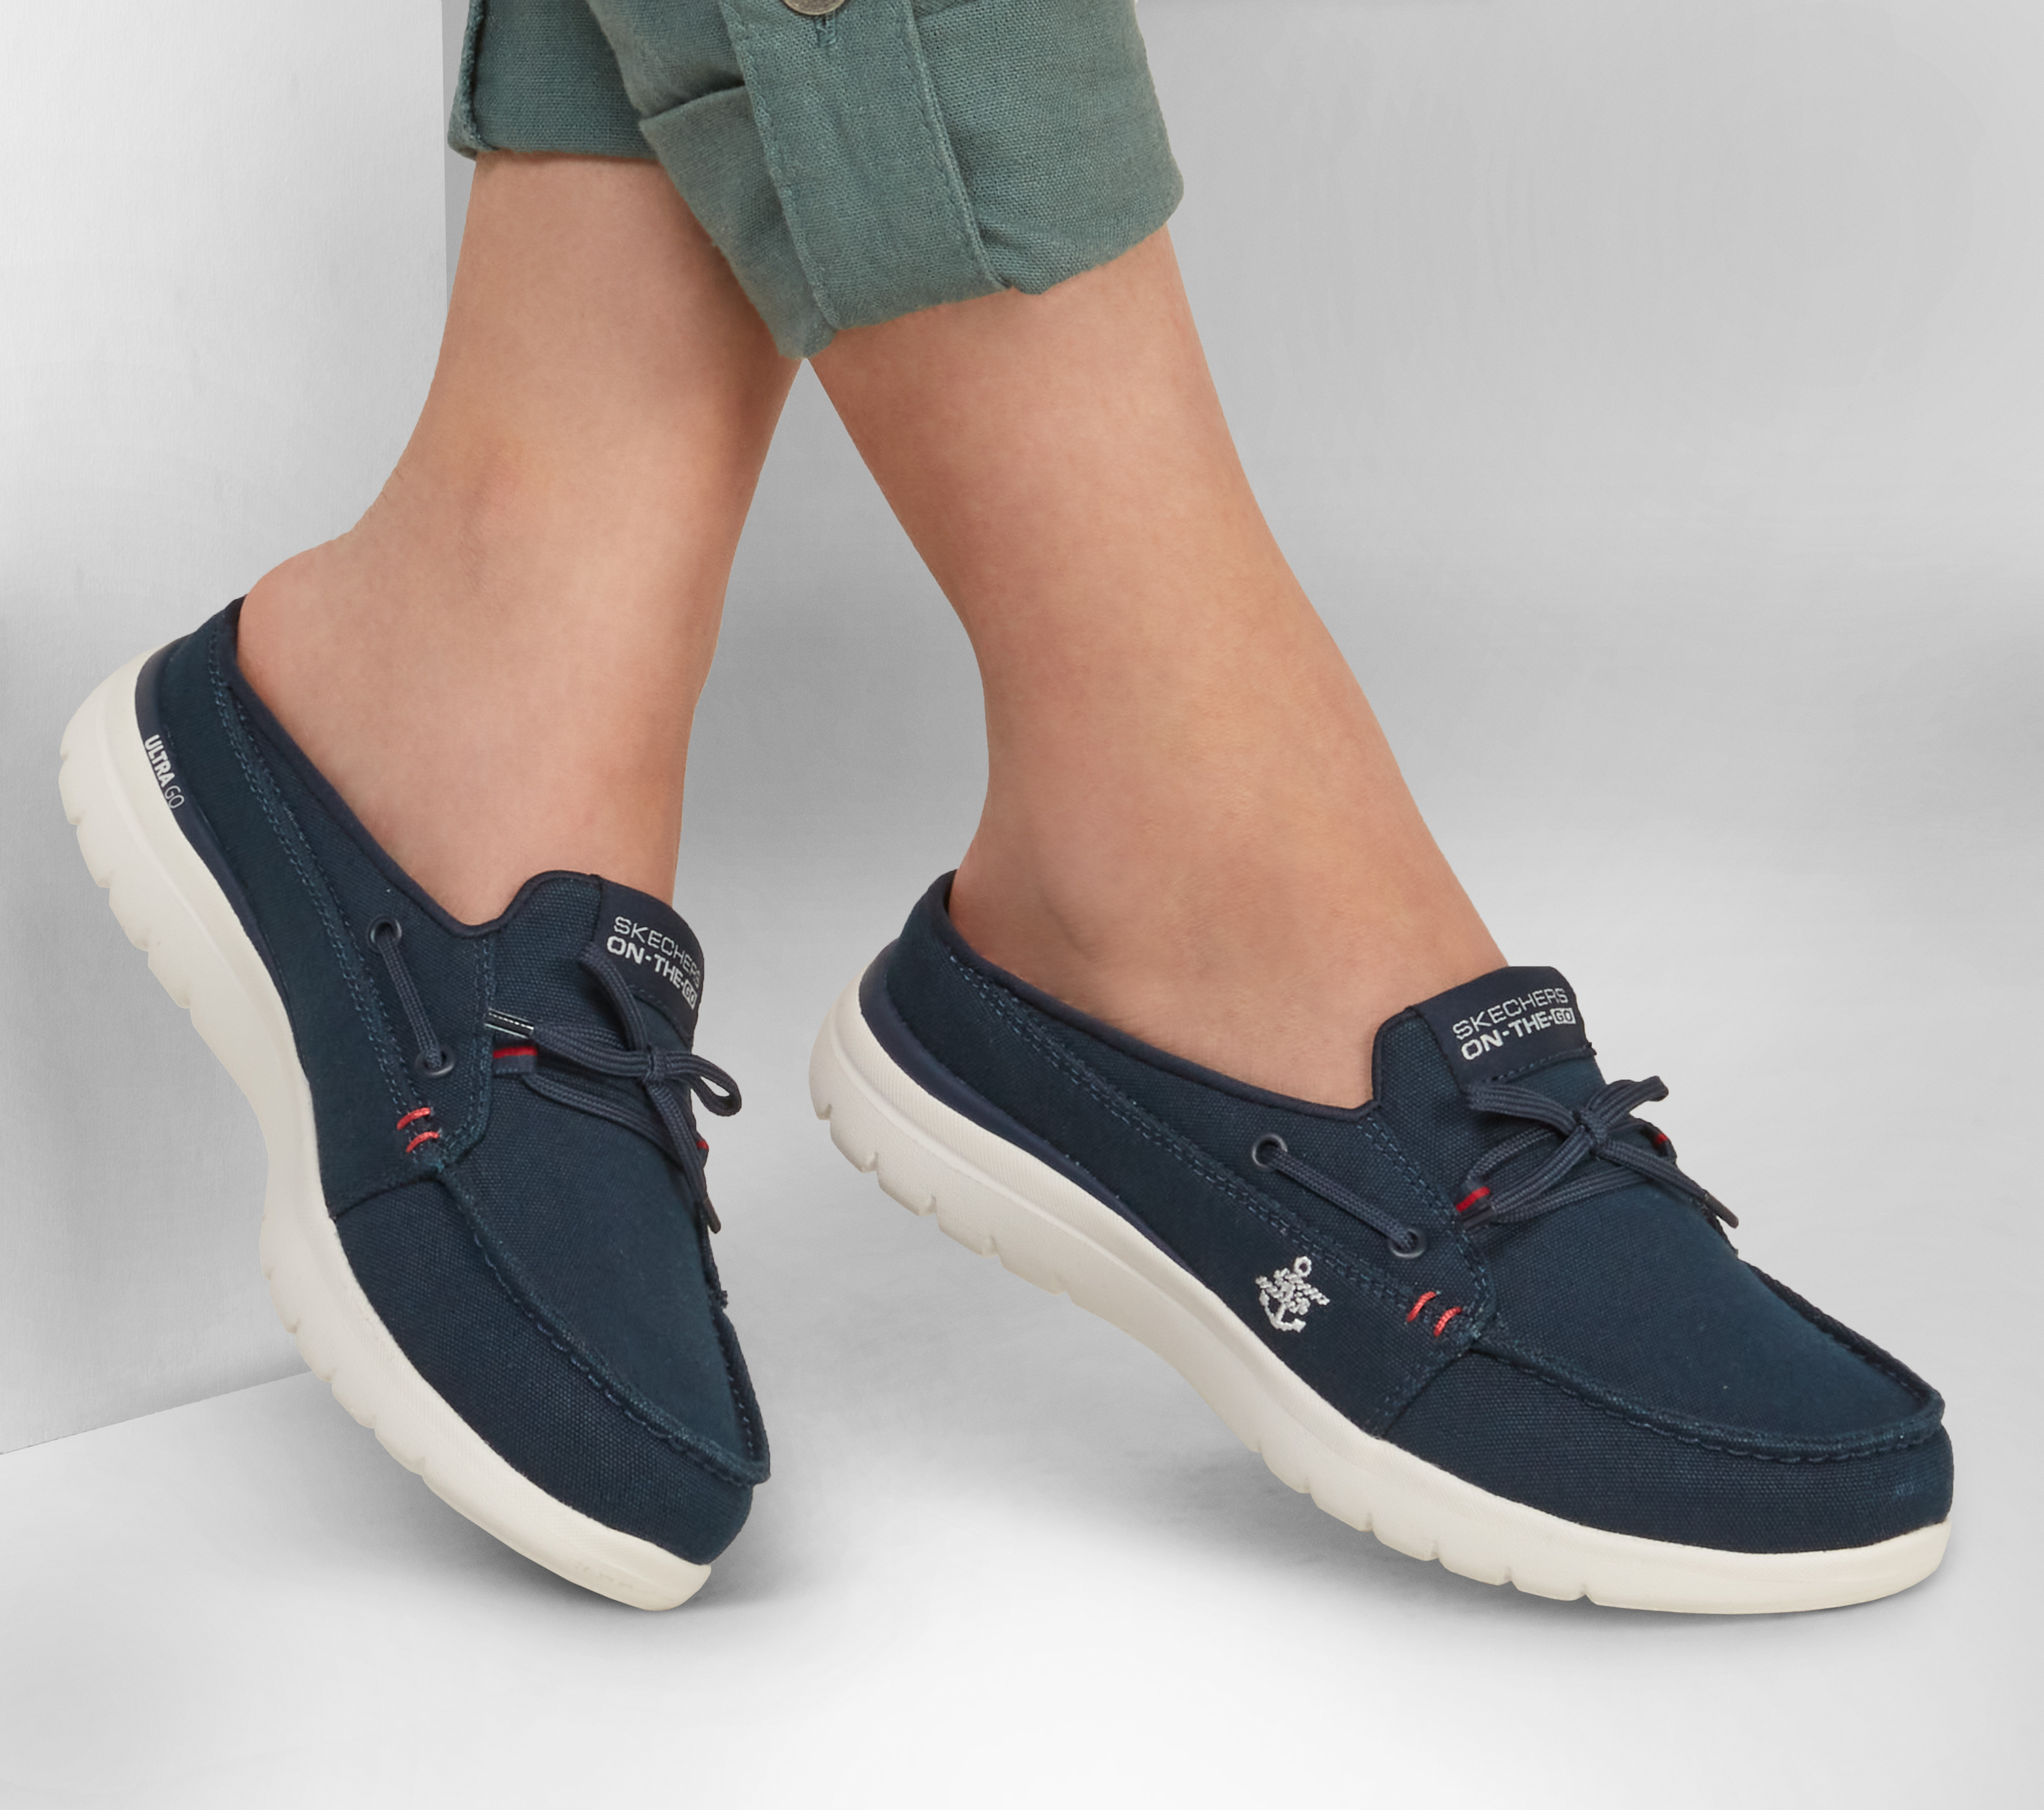 Shop the Skechers On the GO Flex - On 